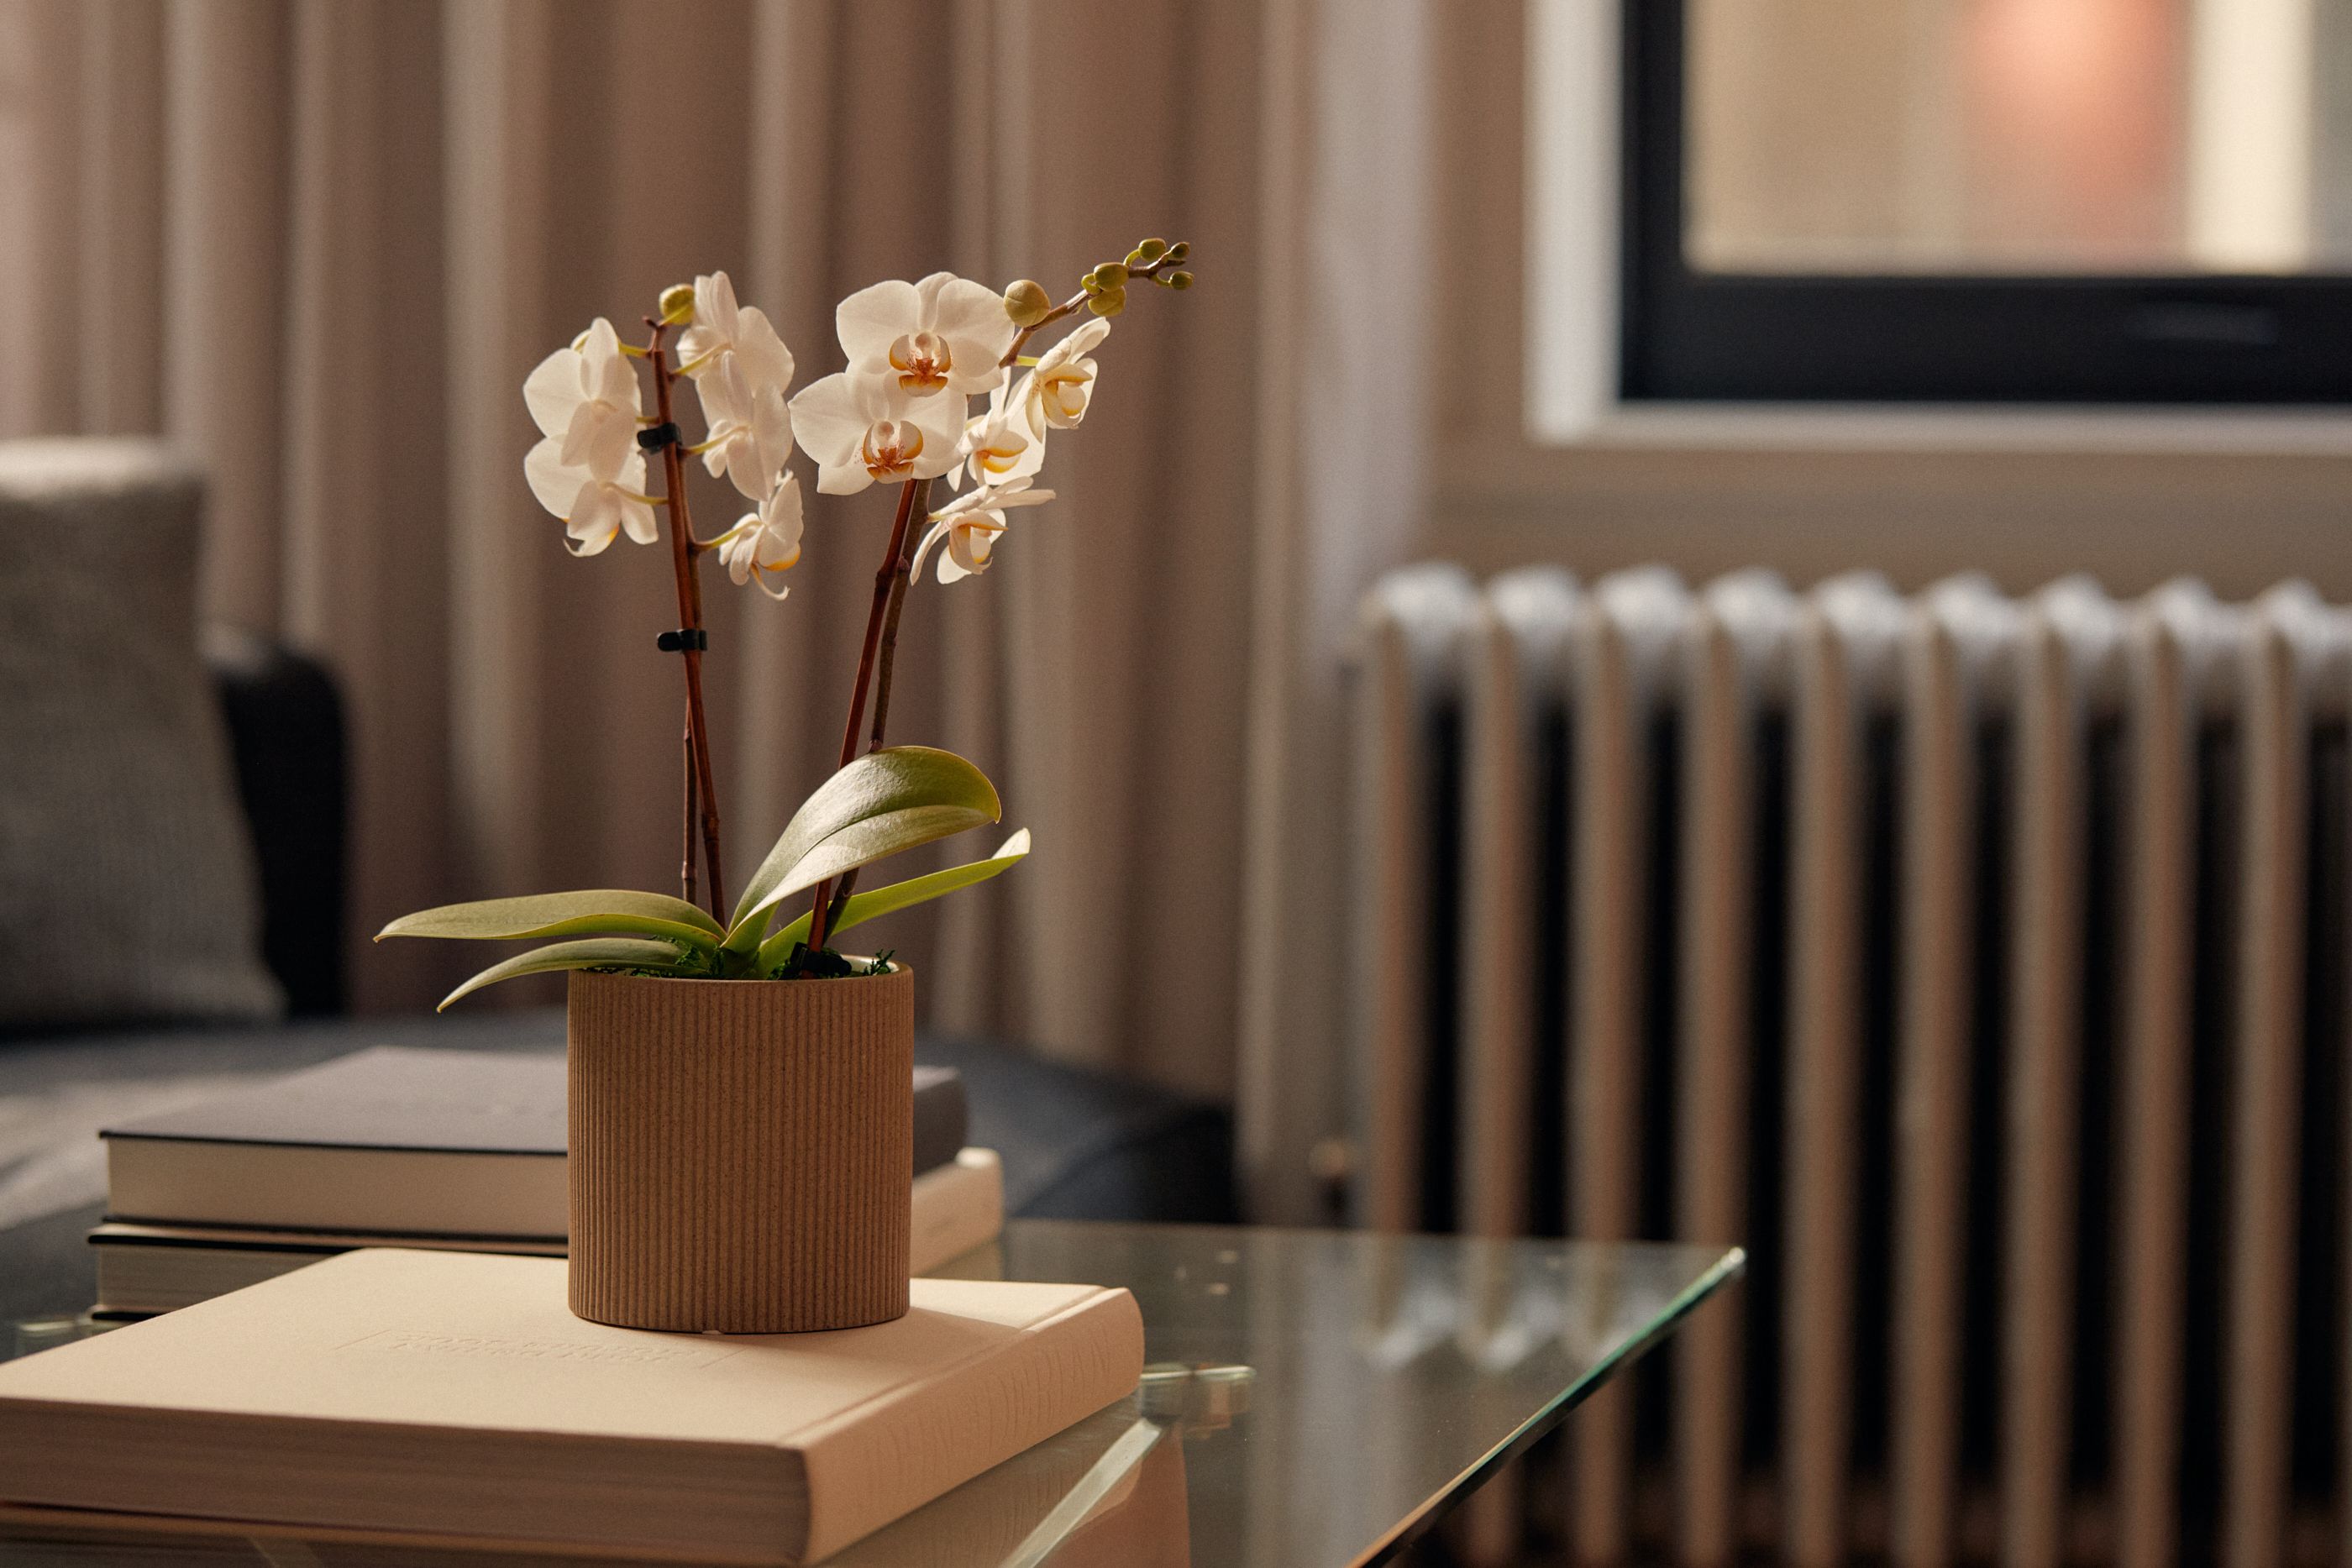 Close up of an orchid in an apartment in an urban setting.